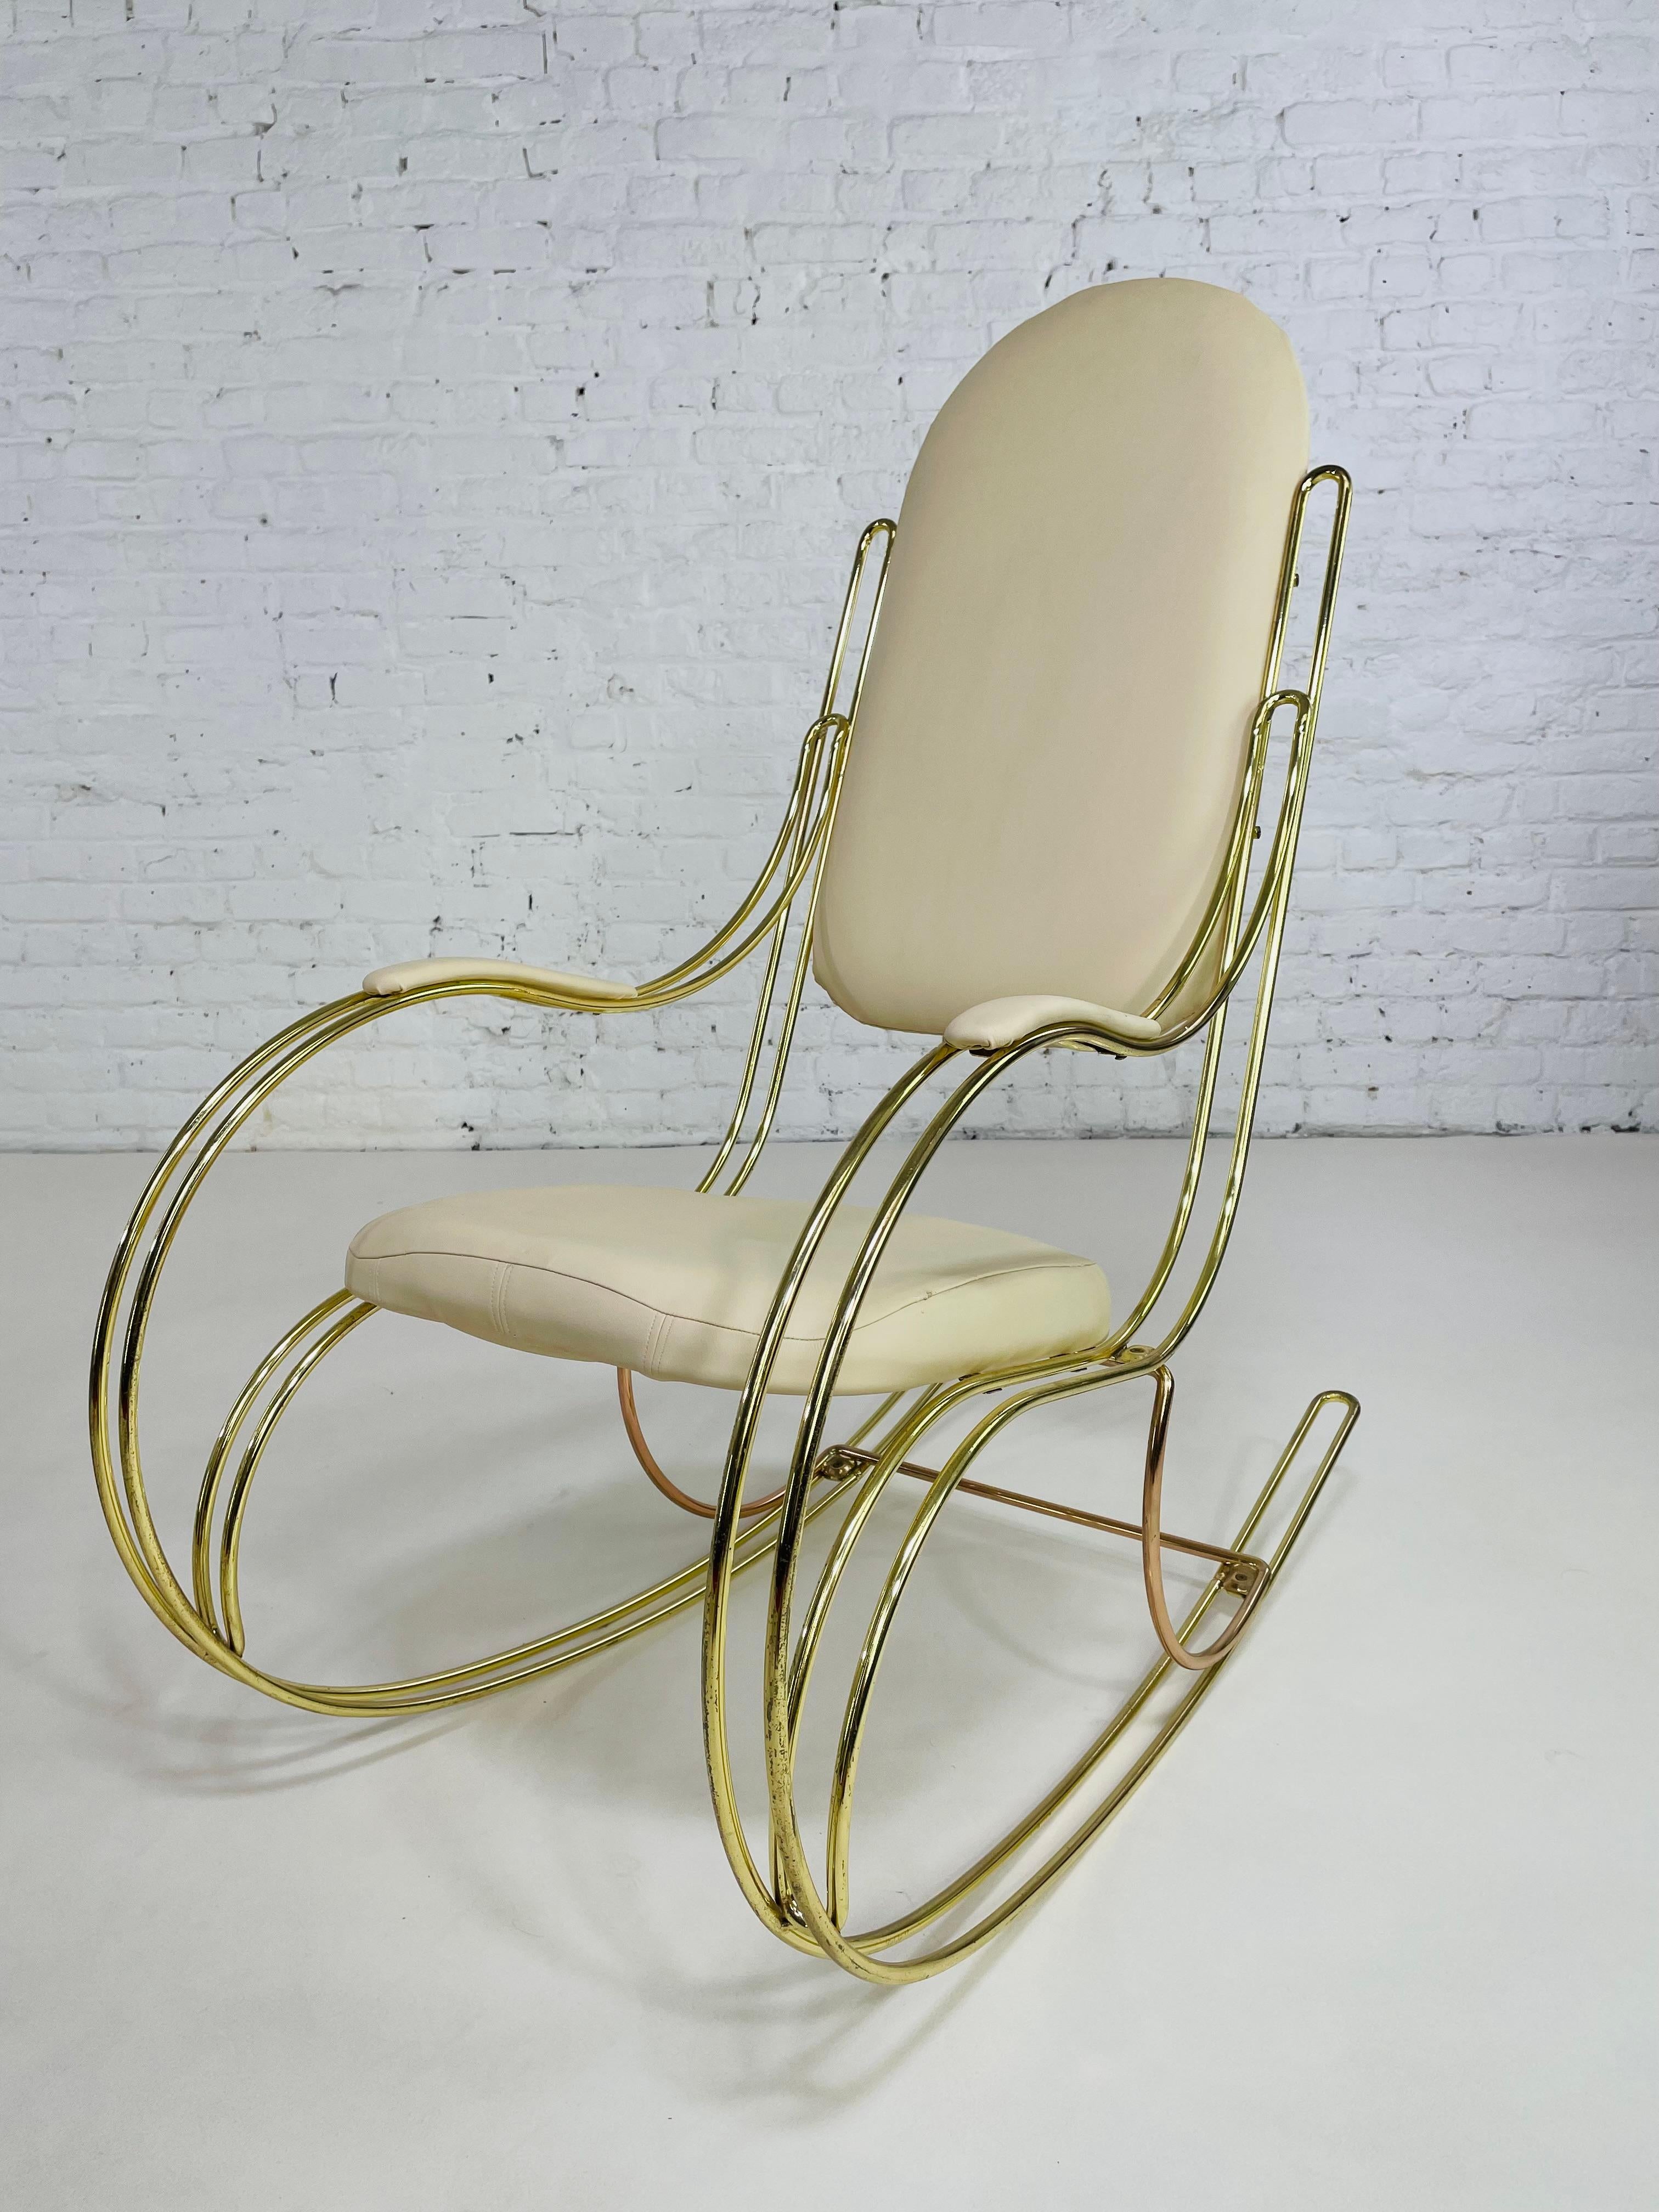 1960s-1970s Brass And Beige Faux Leather Rocking Chair For Sale 7